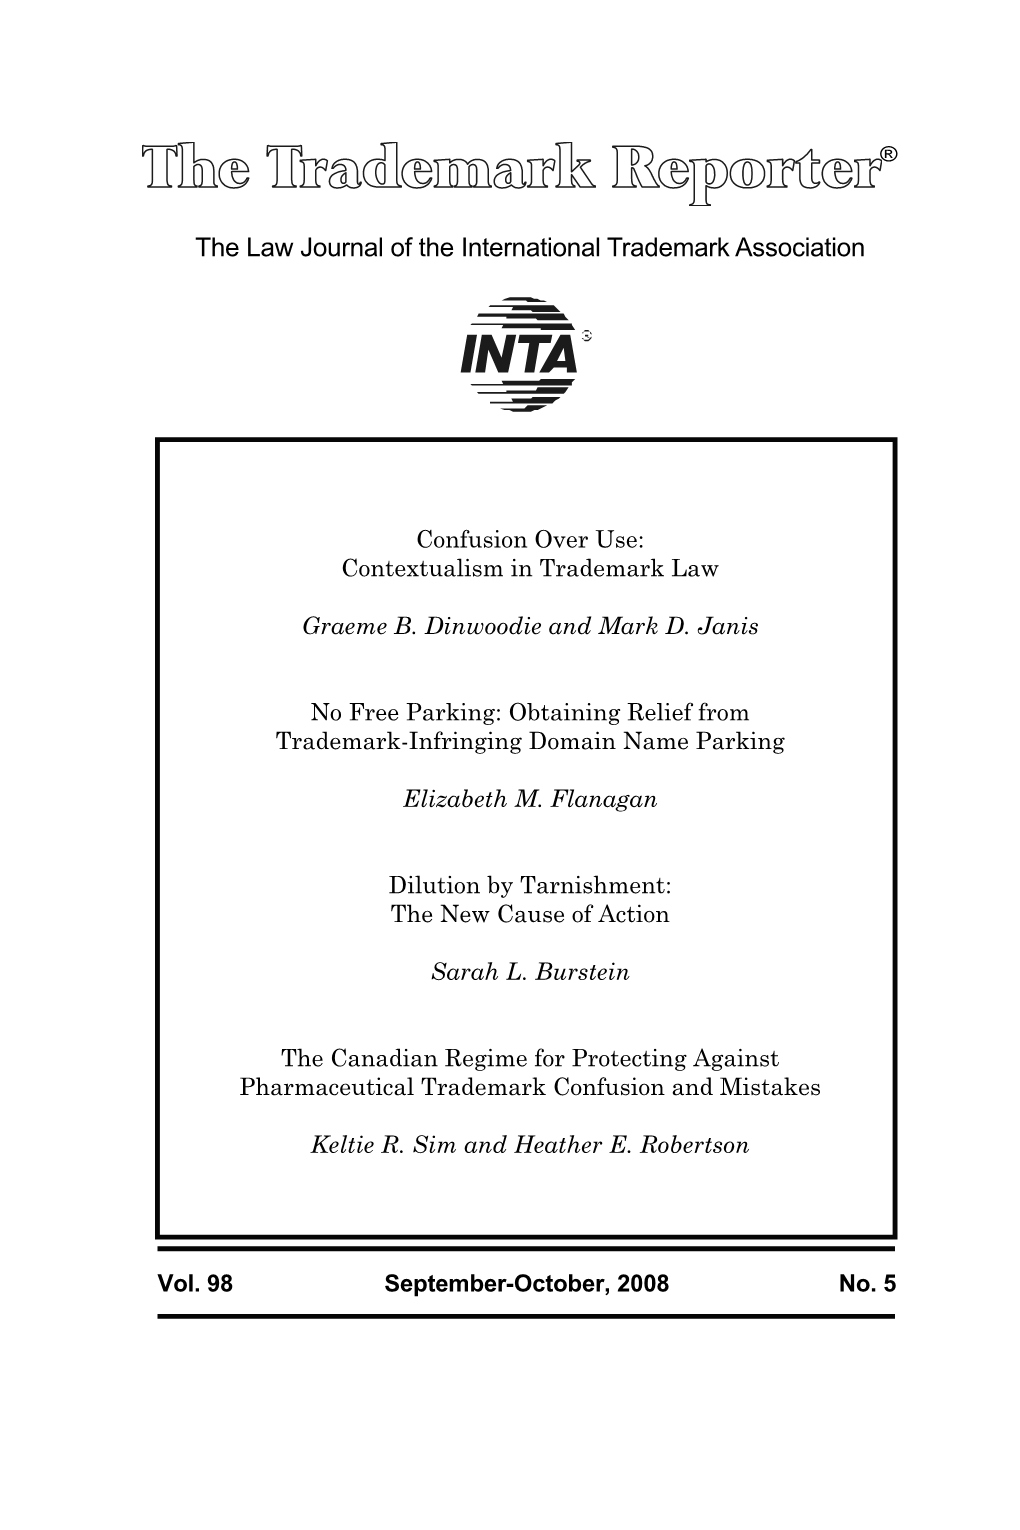 The Law Journal of the International Trademark Association